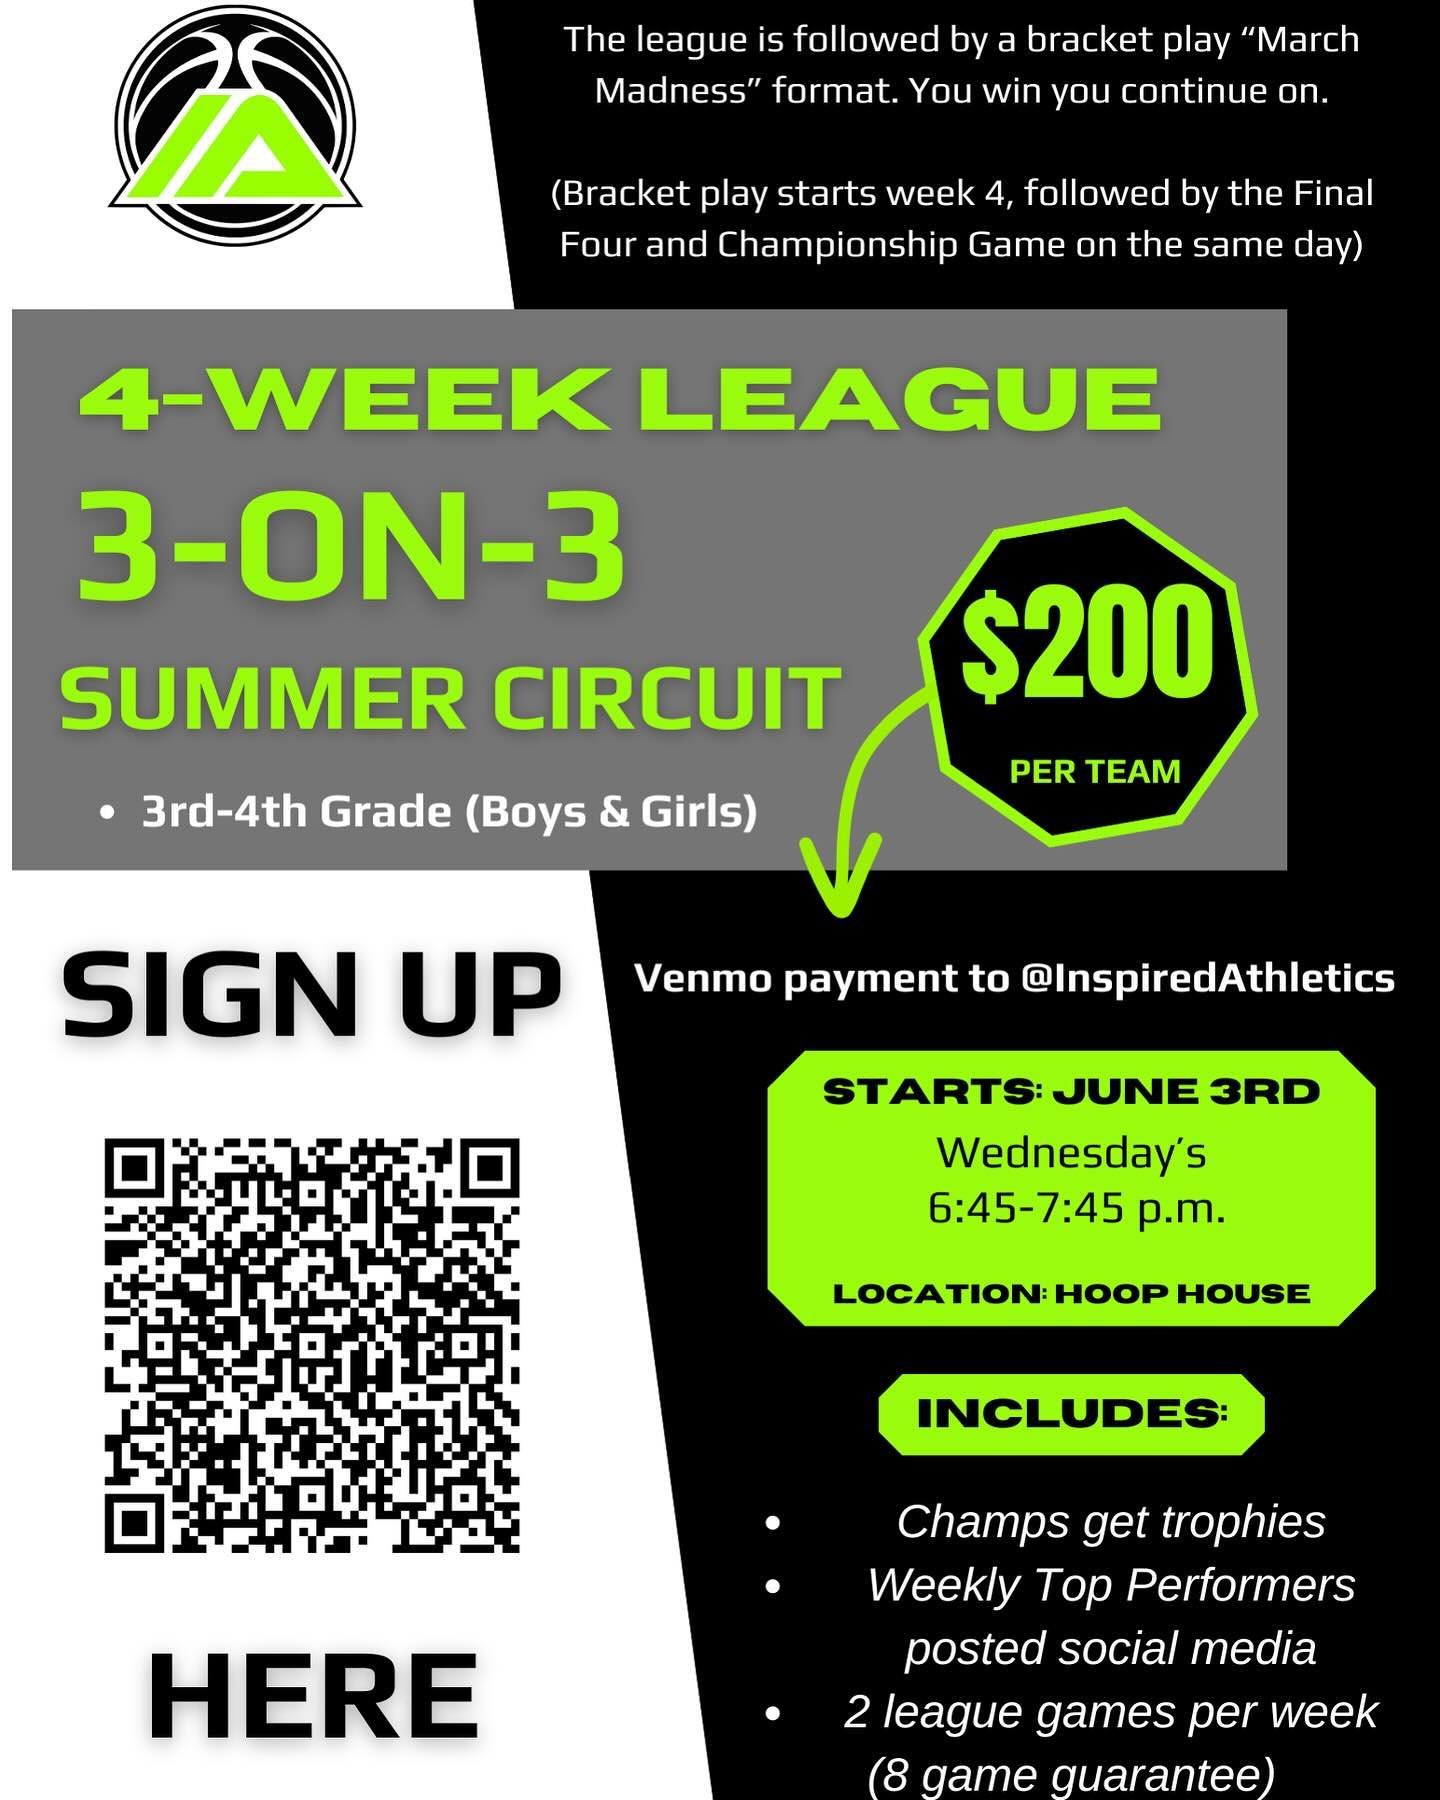 🚨 IA 3-on-3 Summer Circuit 🚨

We are holding a 4-week summer circuit for all 3rd &amp; 4th graders that starts June 3rd. 

Cost: $200/team (Venmo @inspiredathletics) 

Use the QR code below to sign up today or follow this link: https://shorturl.at/